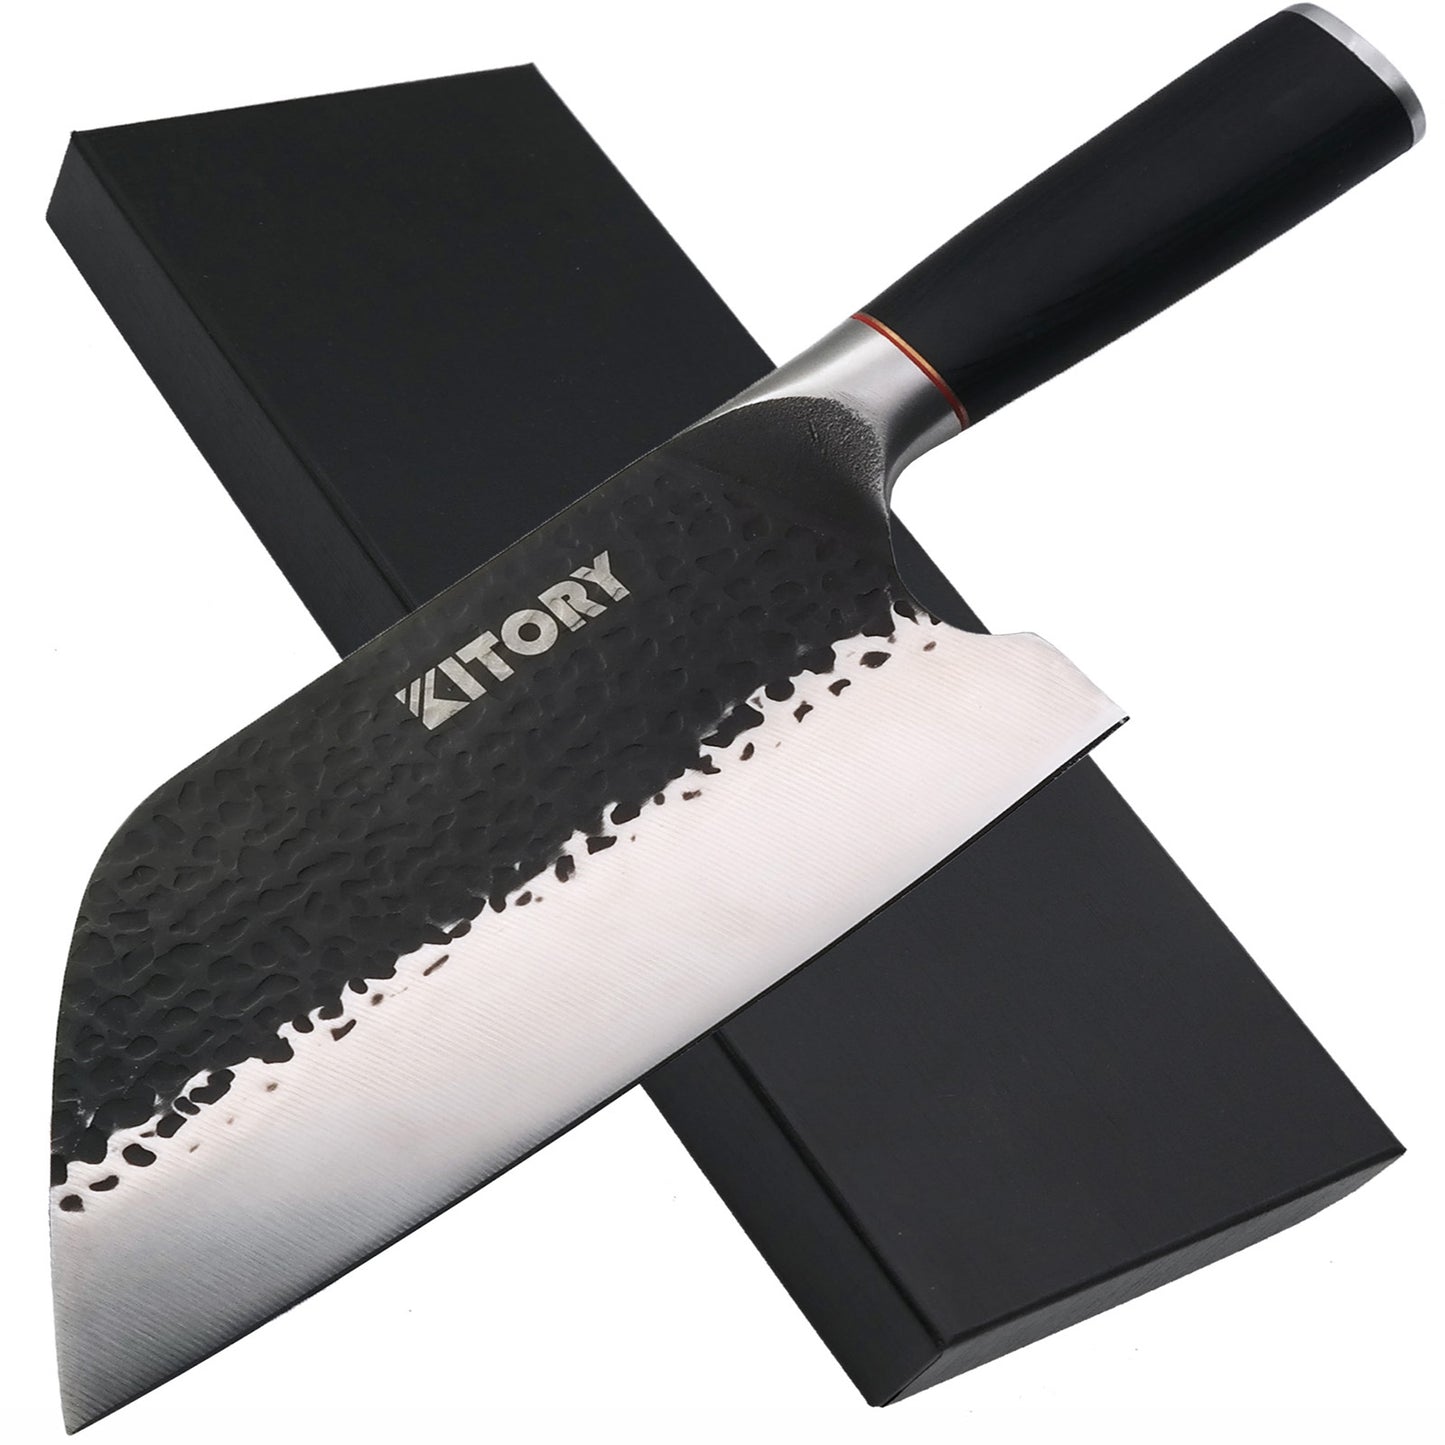 Kitory Multipurpose Serbian Meat Cleaver 7.5 Inch High Carbon Steel With Wengewood Handle